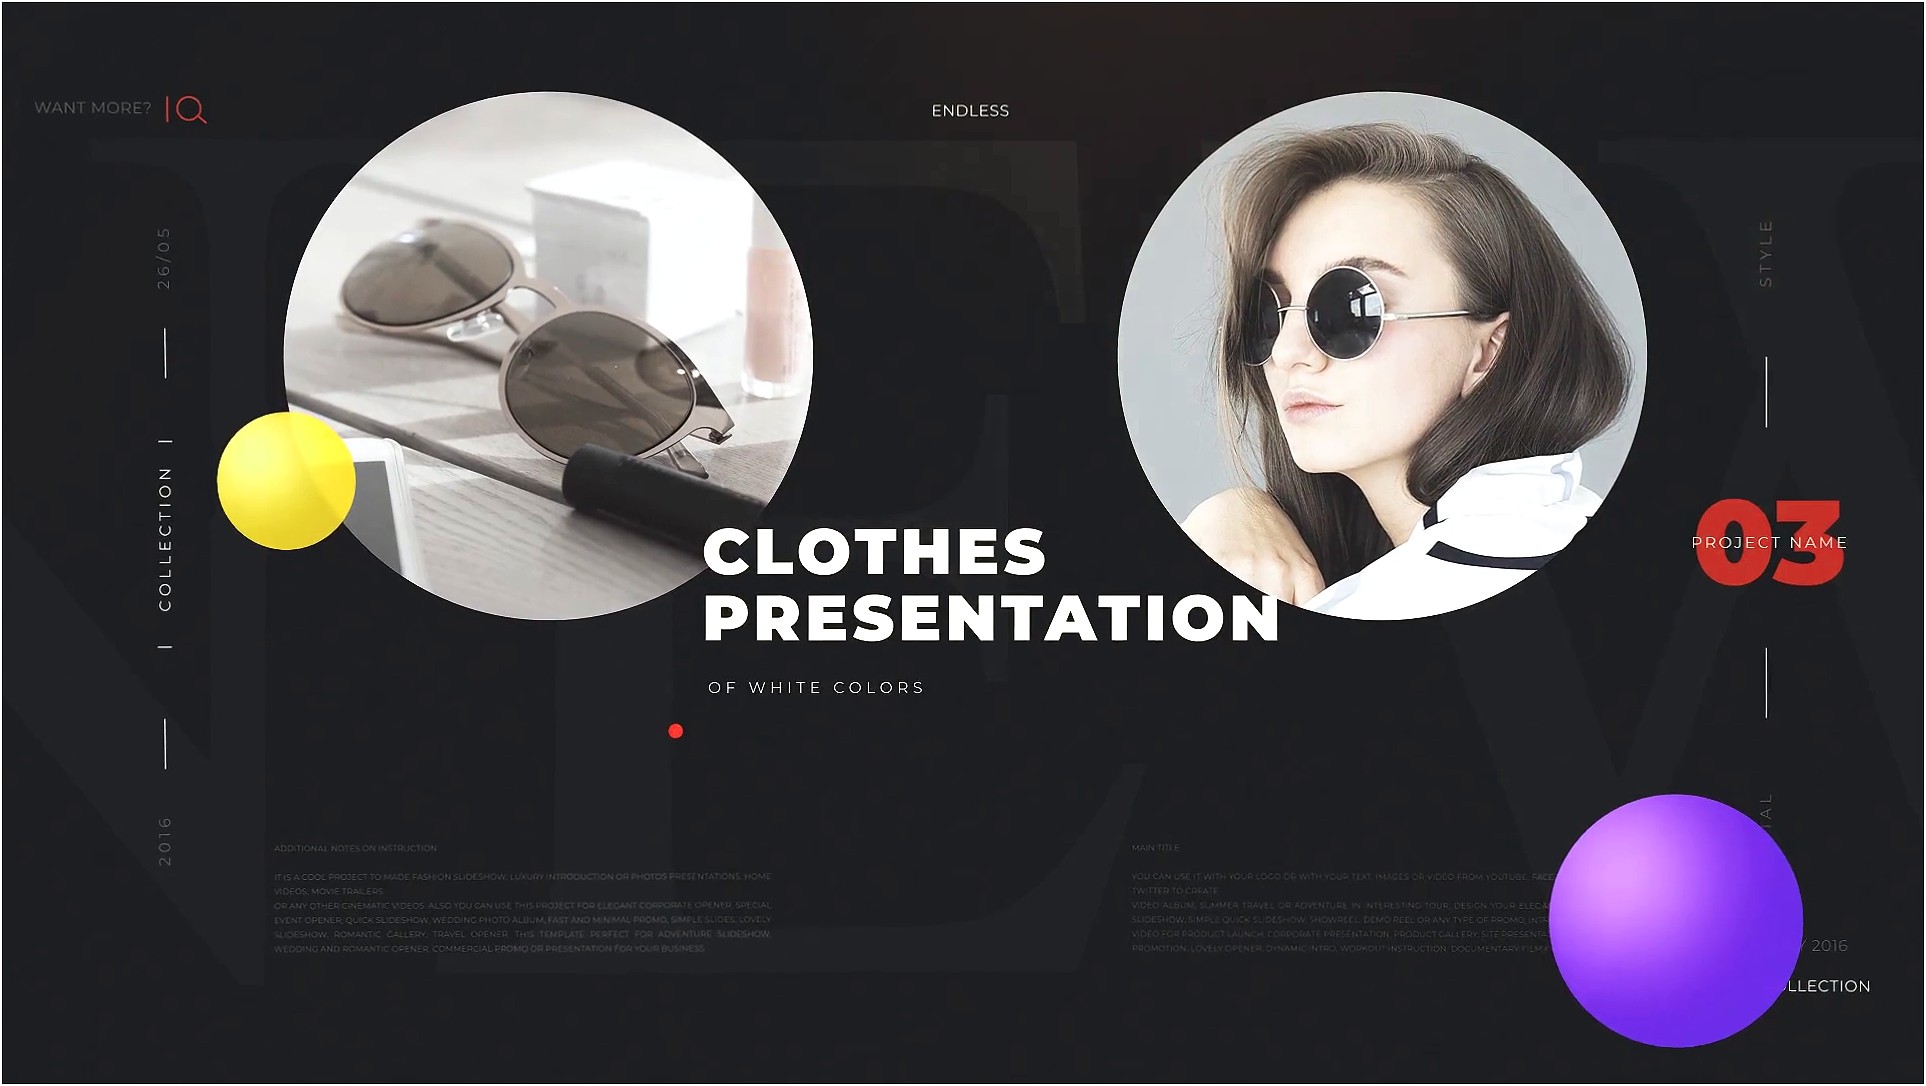 Donwload Free Fashion Promo Event Template After Effects